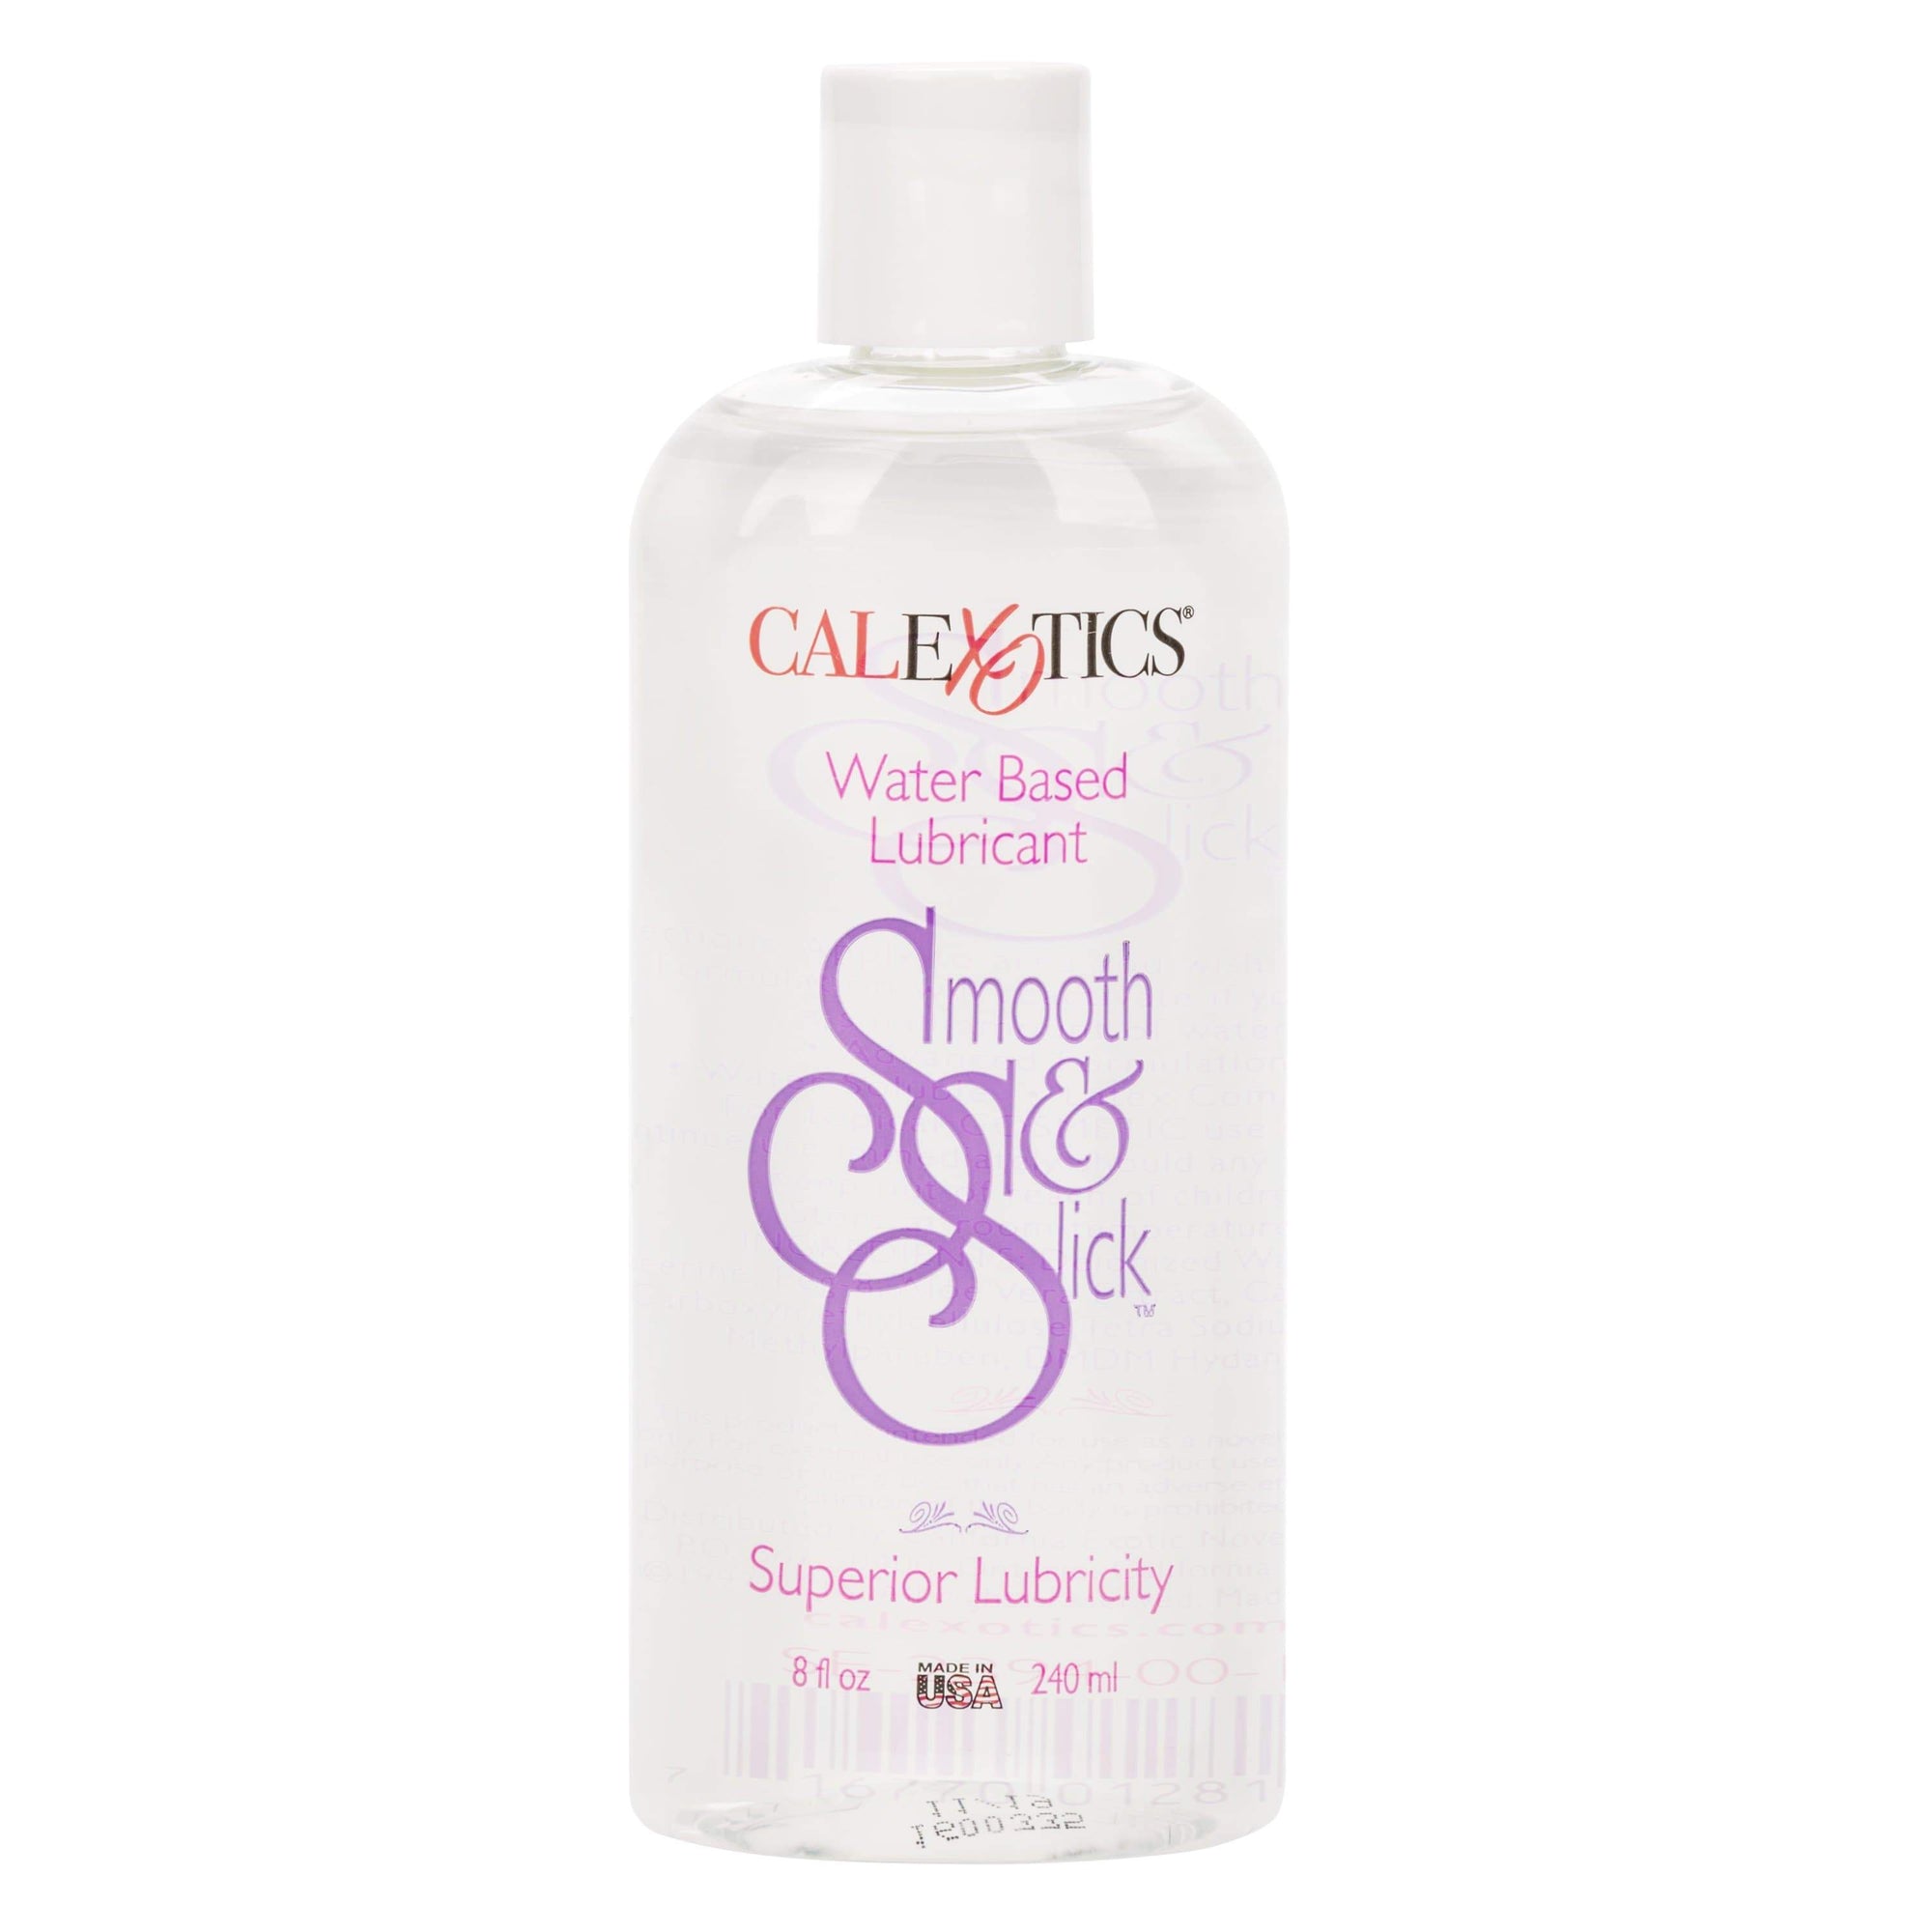 California Exotics - Smooth and Slick Water Based Lubricant 240ml Lube (Water Based) Durio Asia